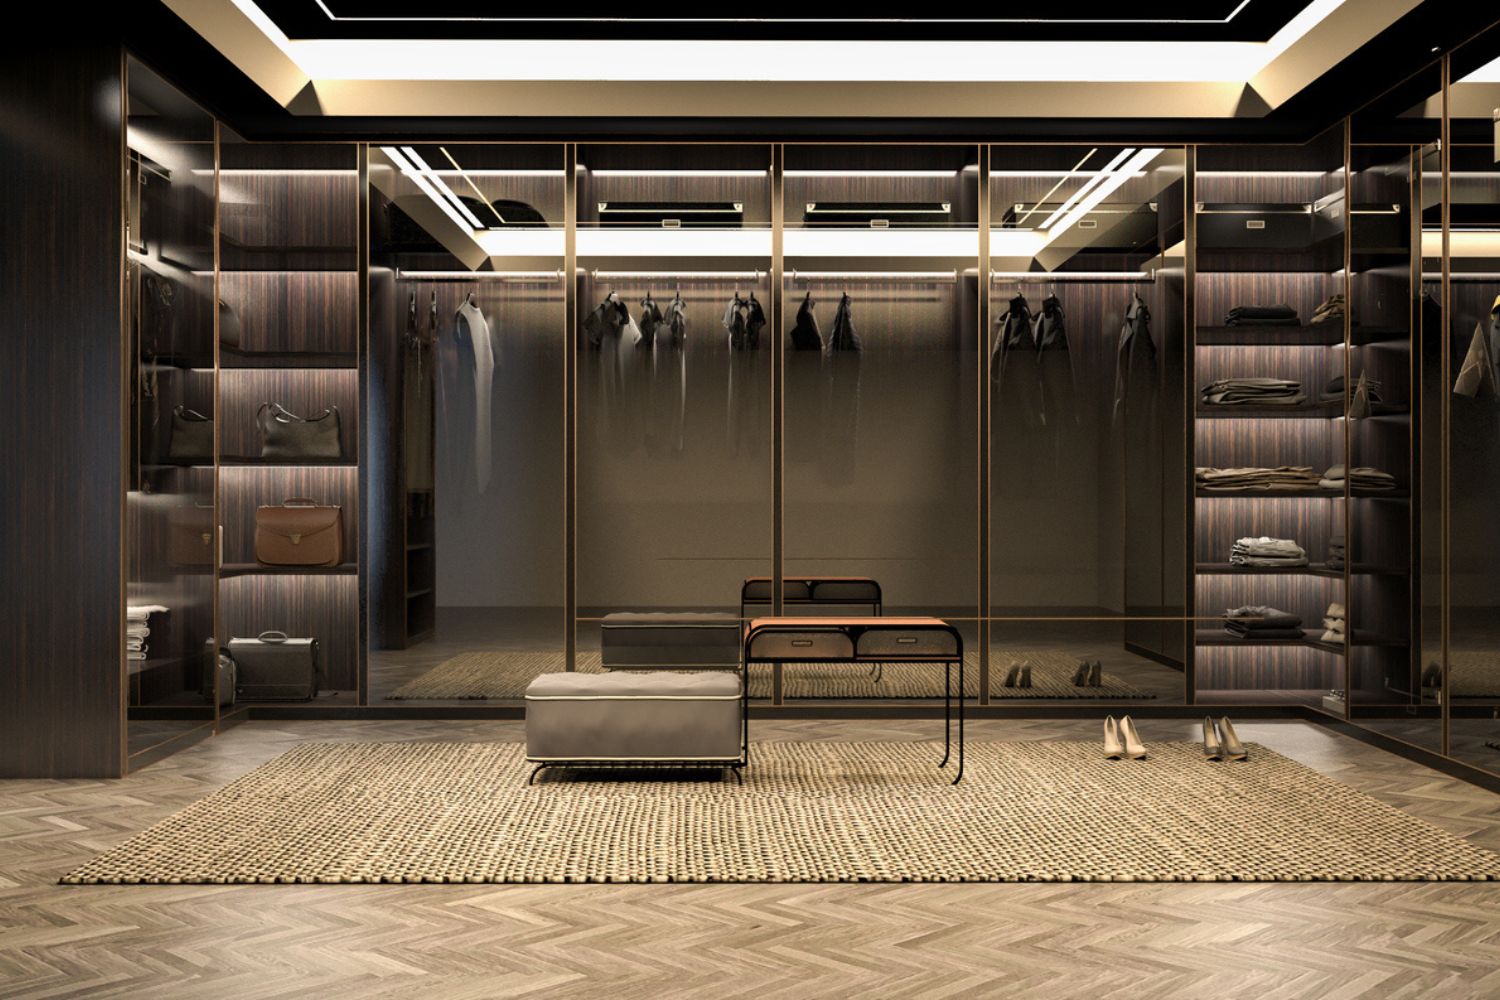 How Much Do Closets by Design Cost